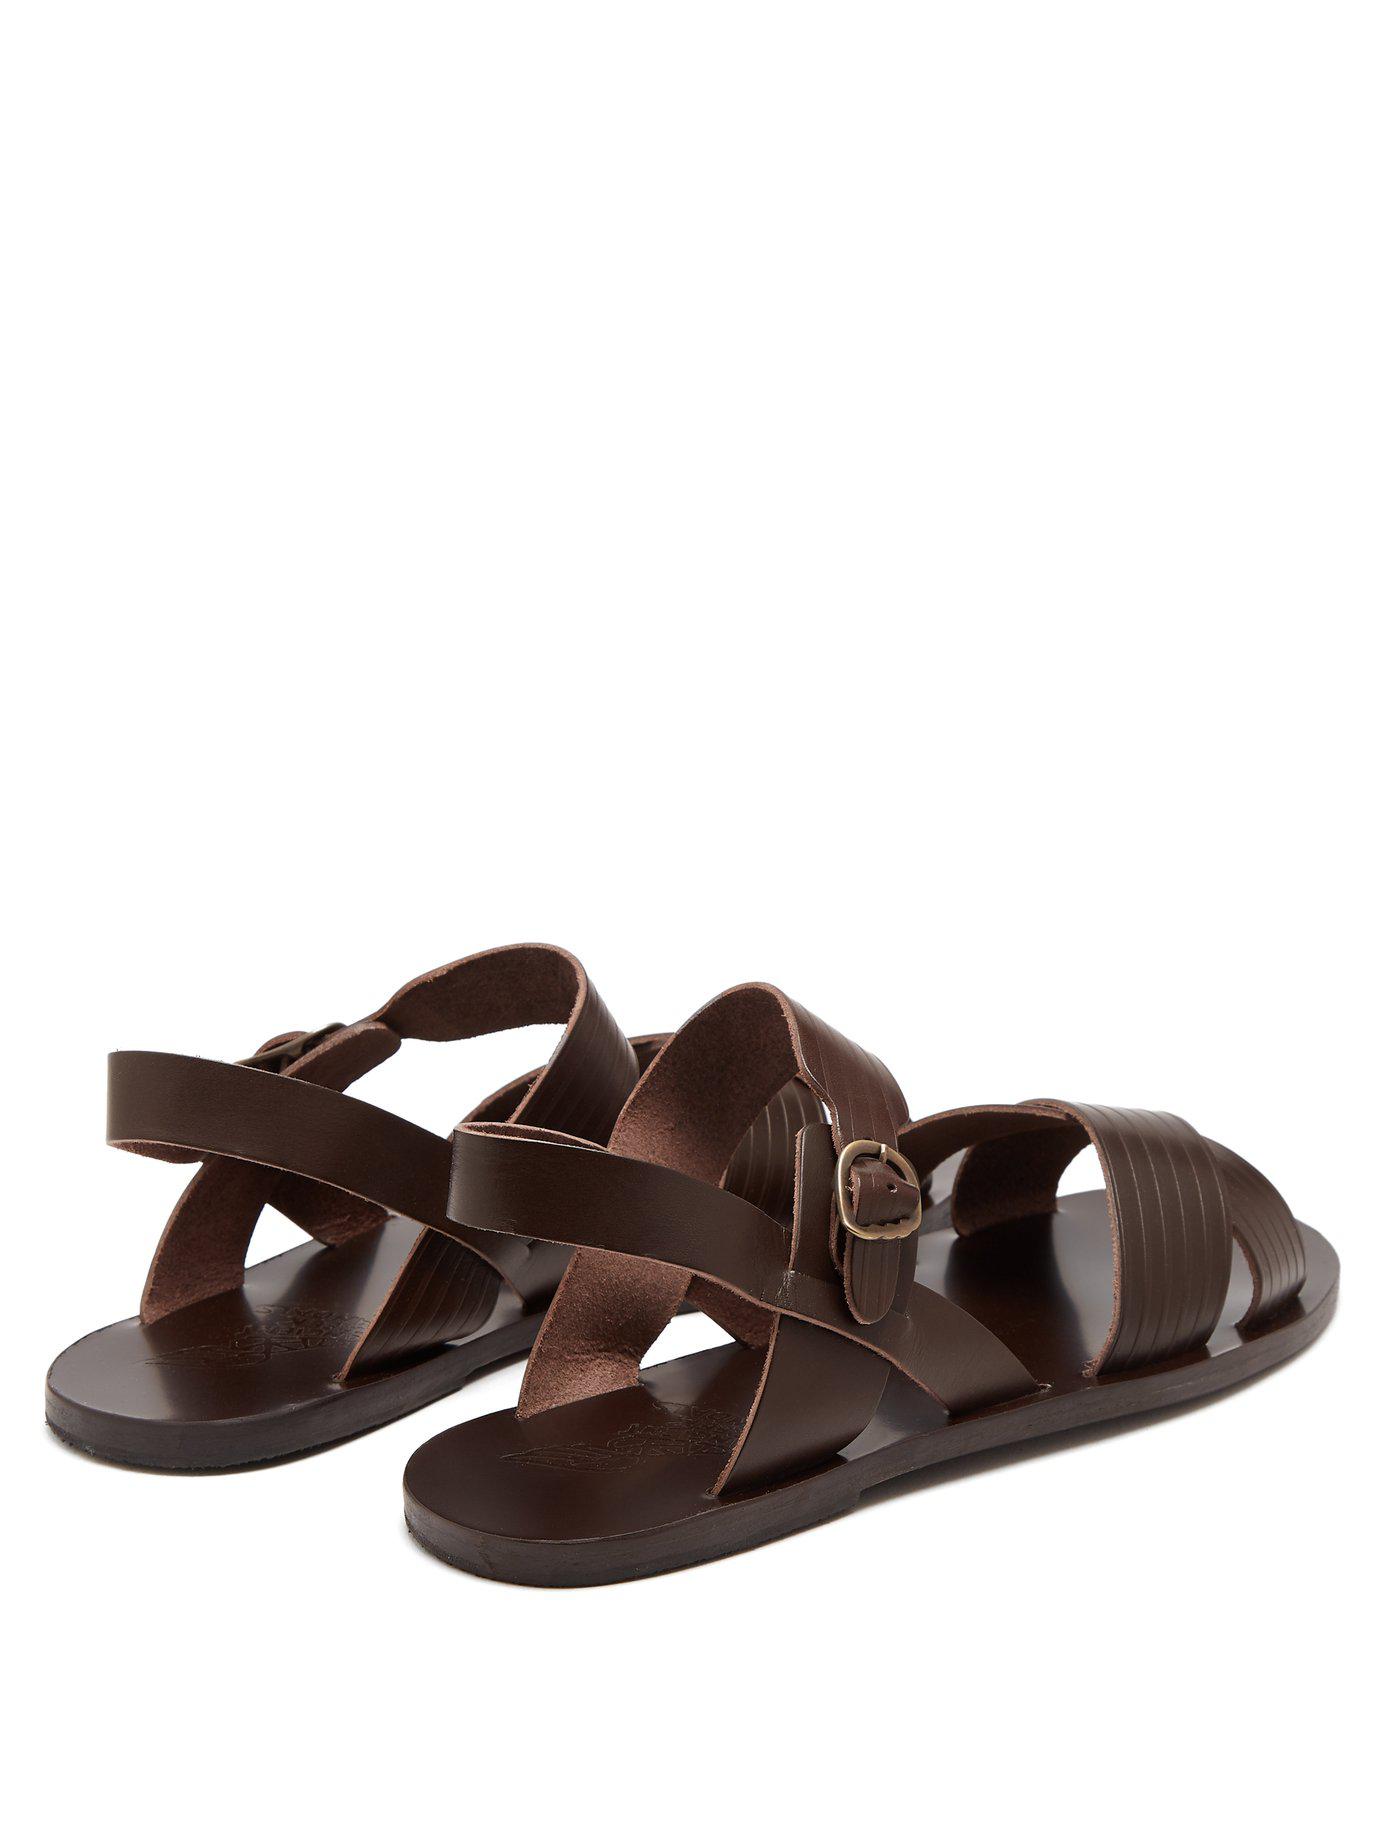 Ancient Greek Sandals Socrates Leather Sandals in Brown for Men | Lyst